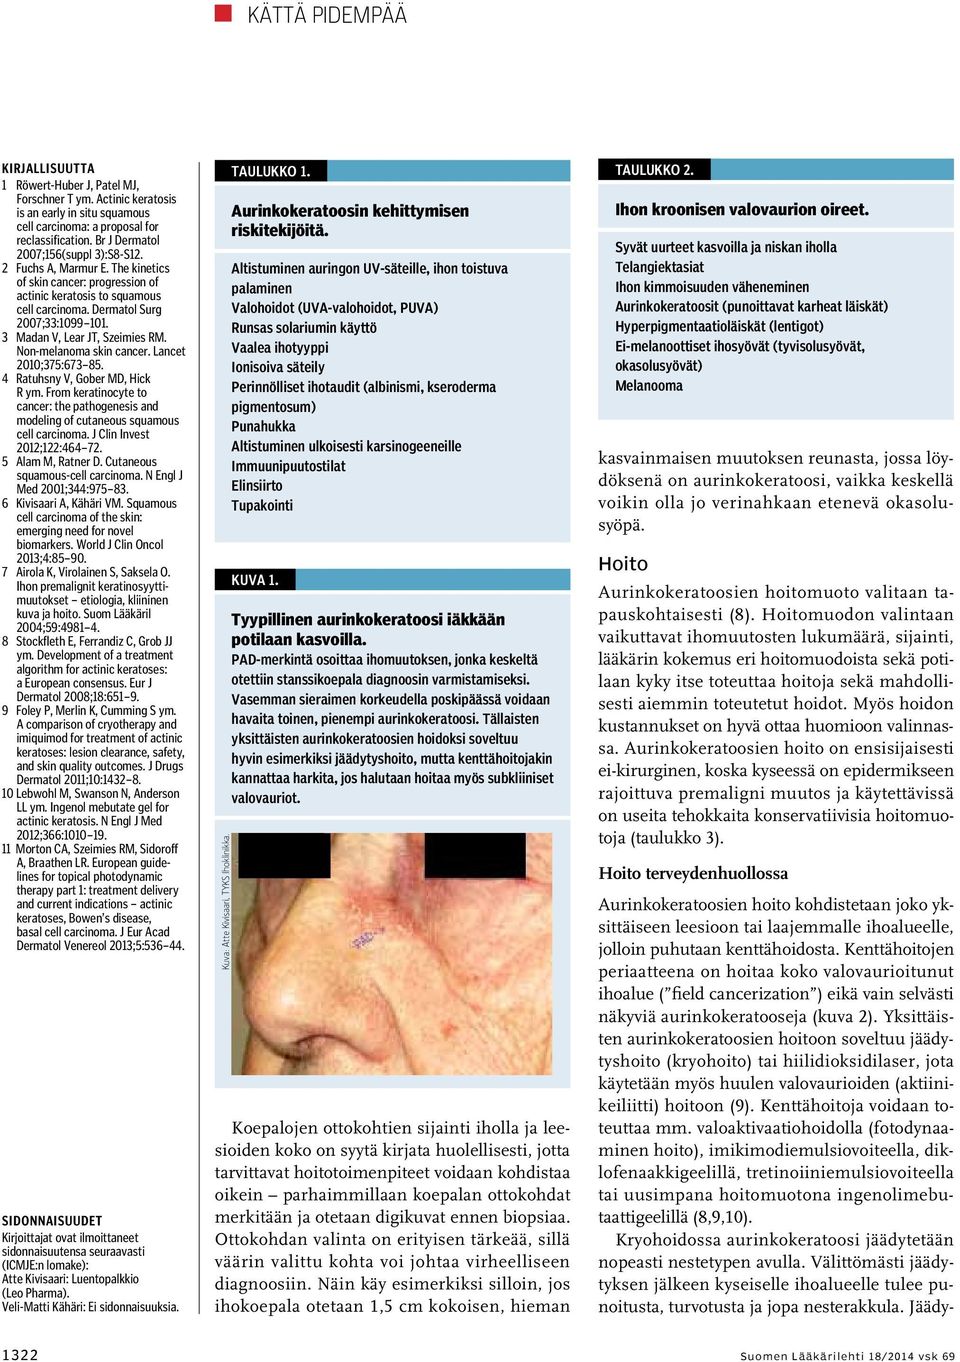 Non-melanoma skin cancer. Lancet 2010;375:673 85. 4 Ratuhsny V, Gober MD, Hick R ym. From keratinocyte to cancer: the pathogenesis and modeling of cutaneous squamous cell carcinoma.